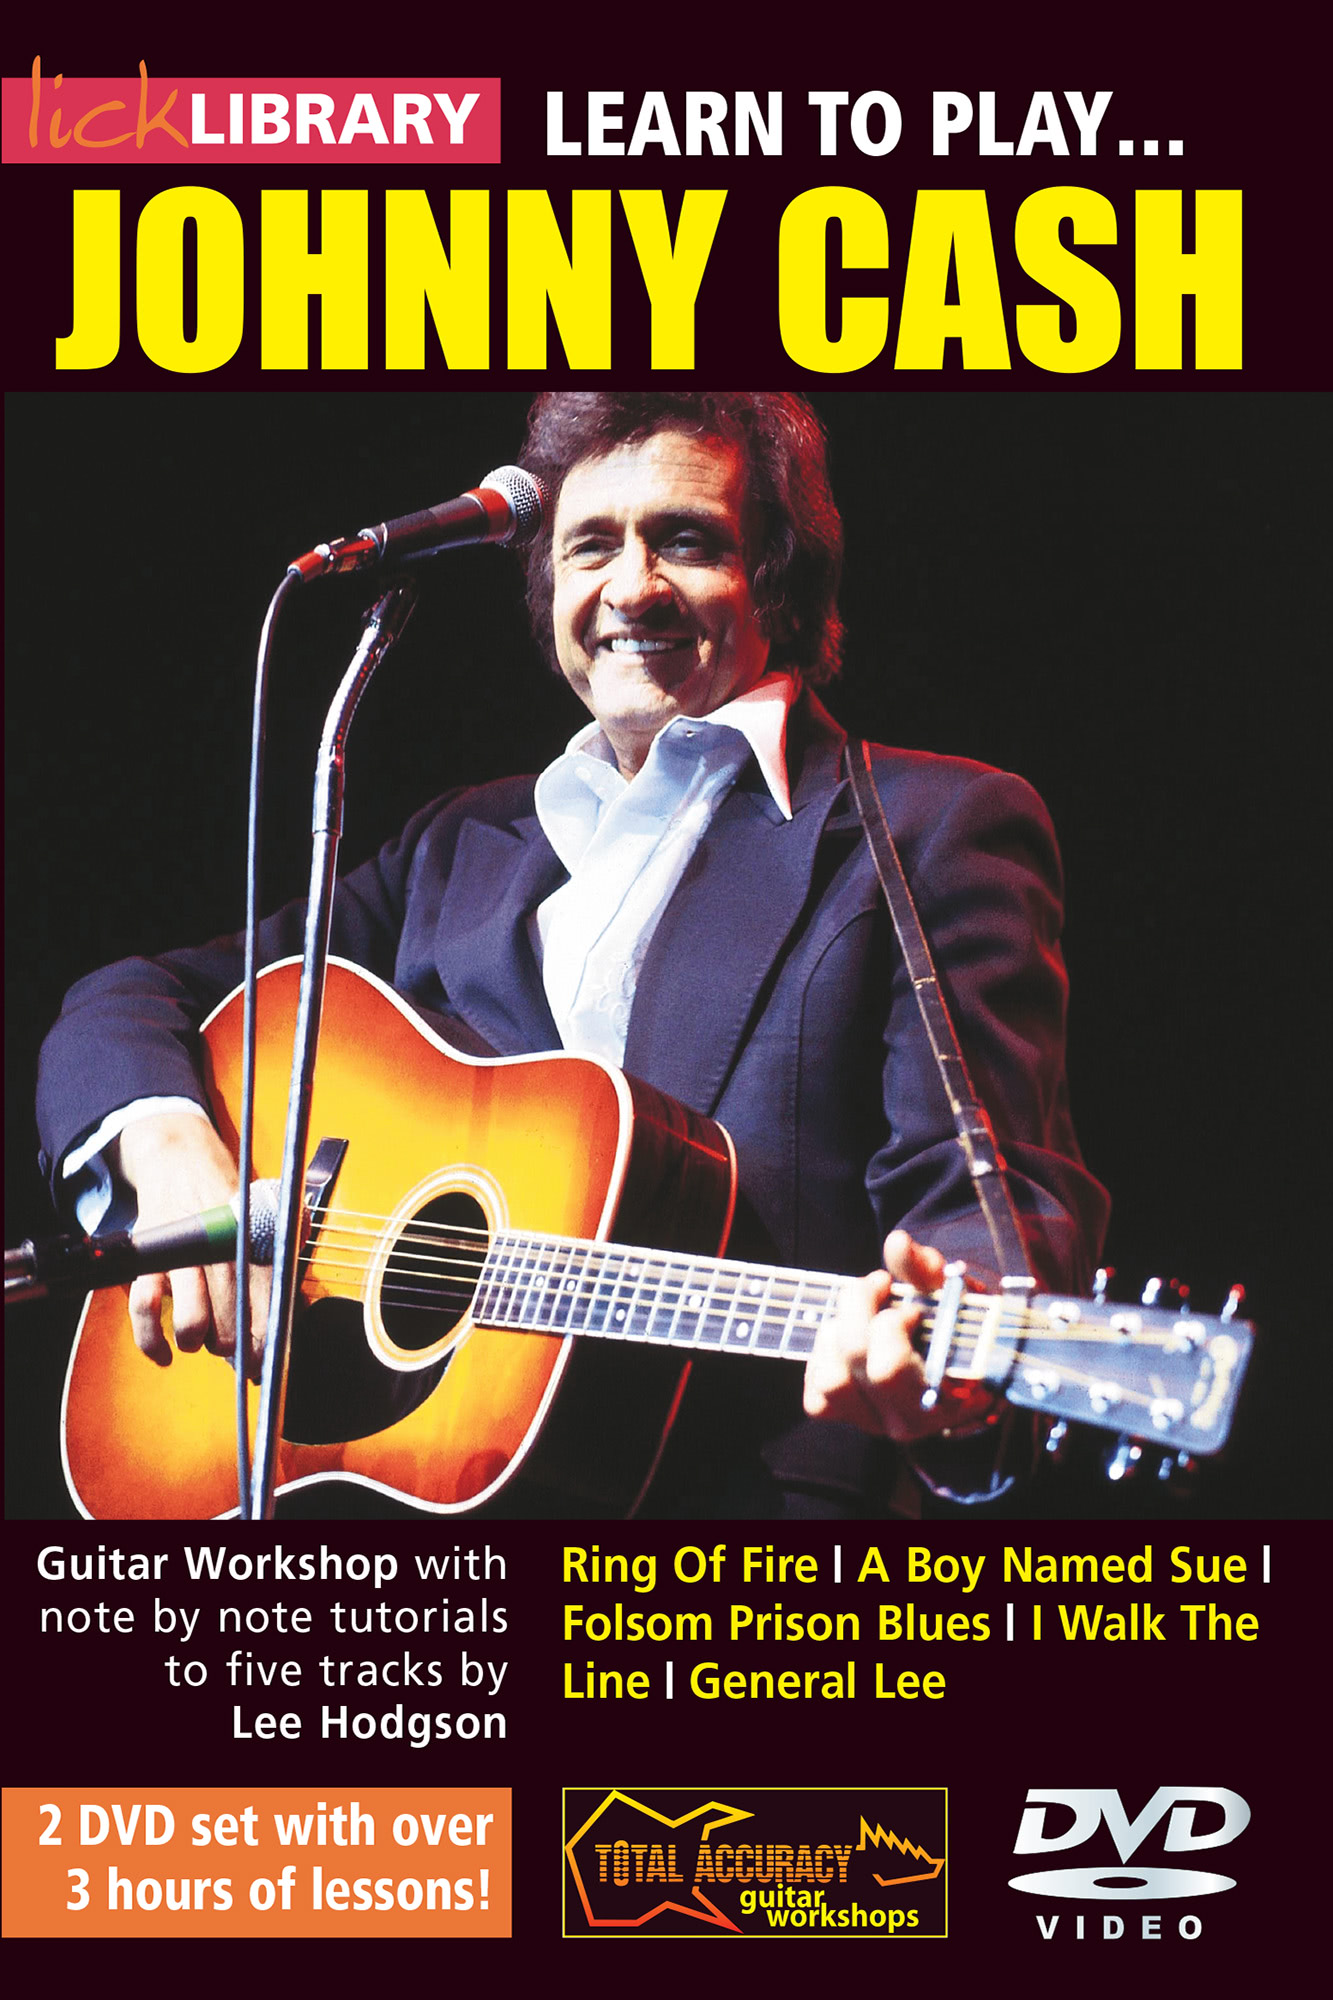 Learn To Play Johnny Cash | Store | LickLibrary